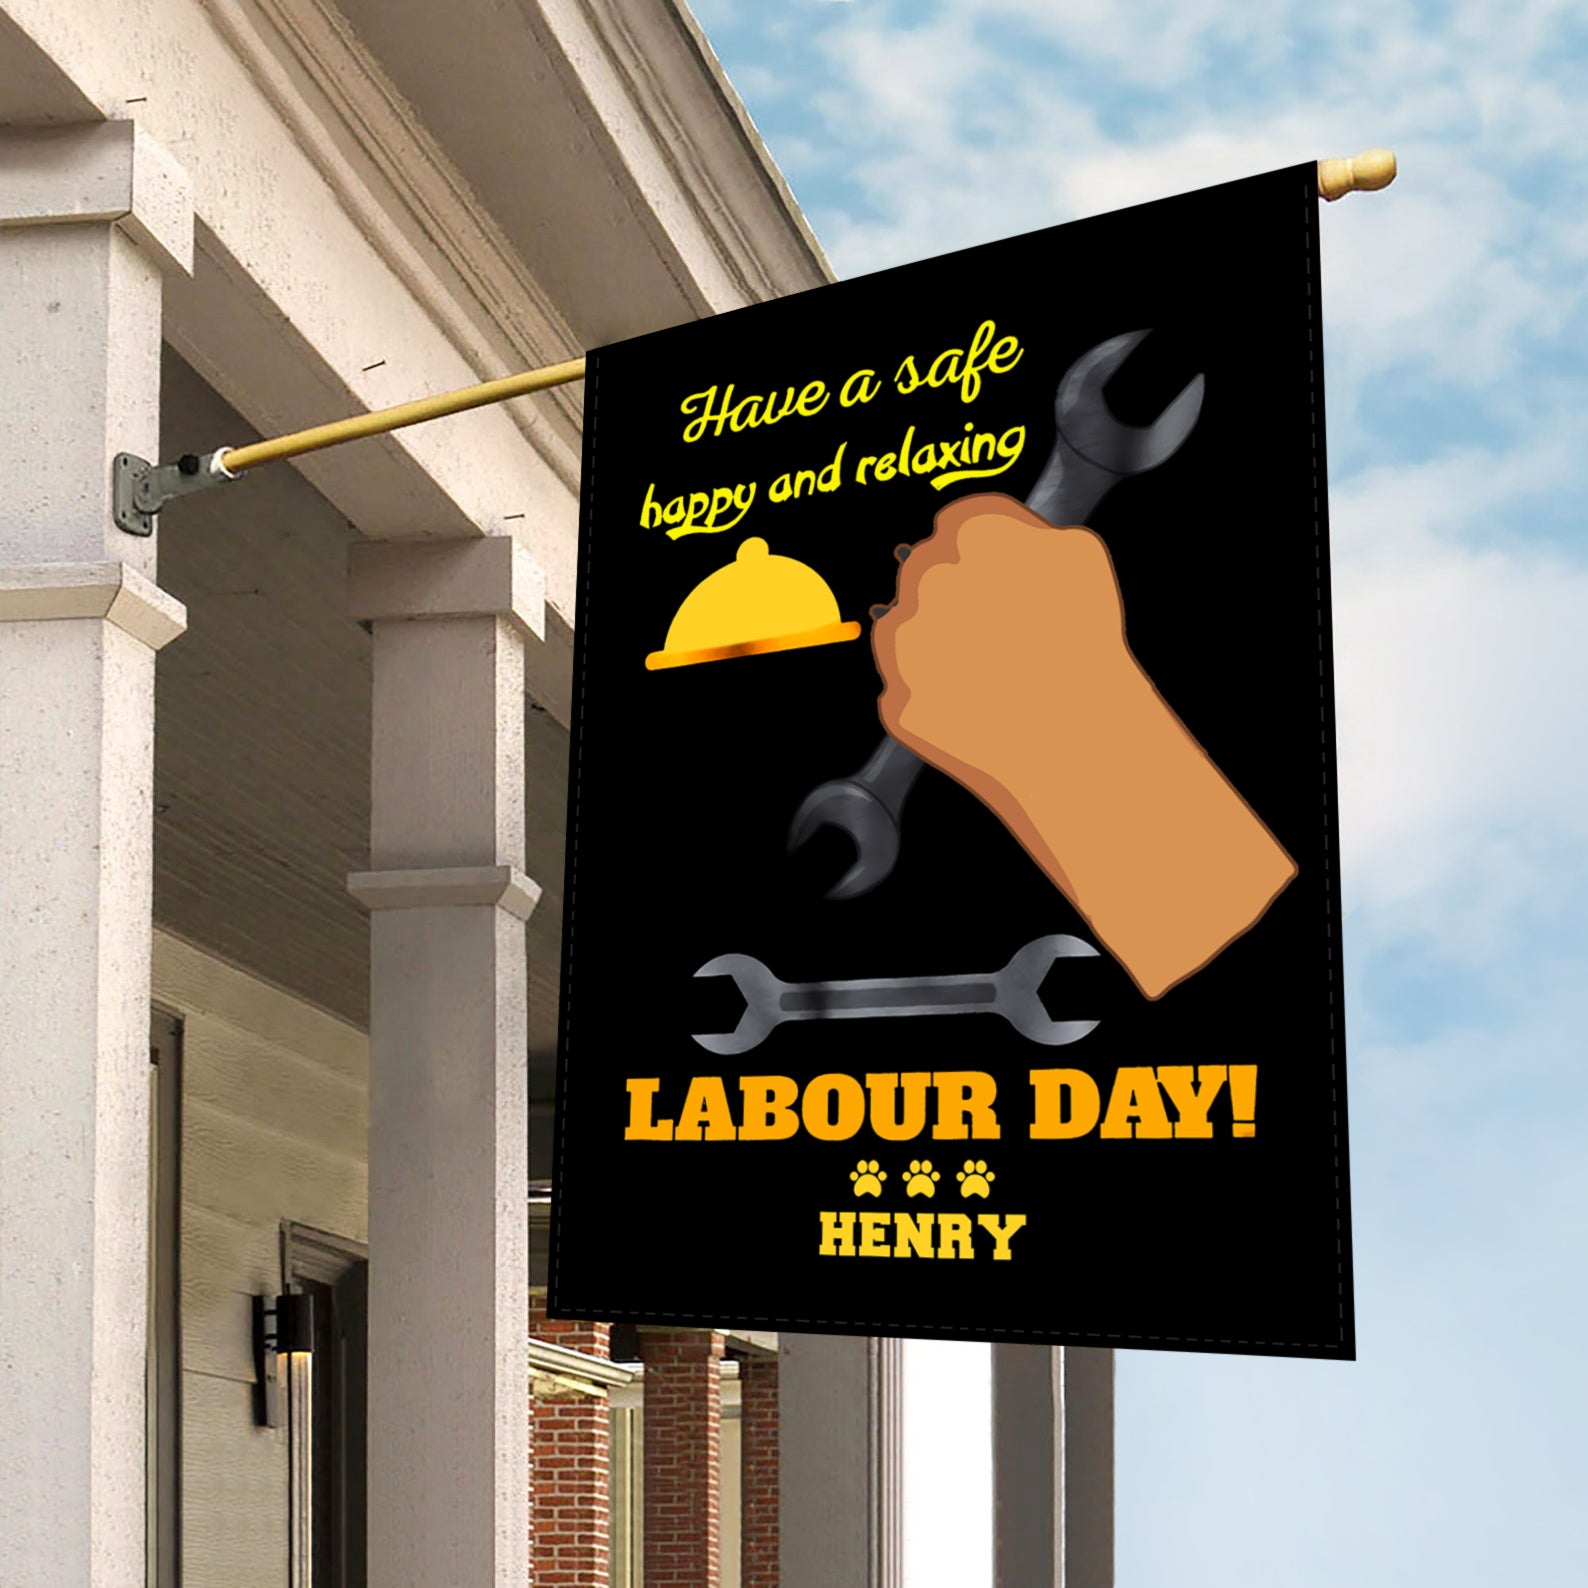 Personalized Dog Gift Idea - Have A Safe Happy And Relaxing Labour Day For Dog Lovers - Garden Flag